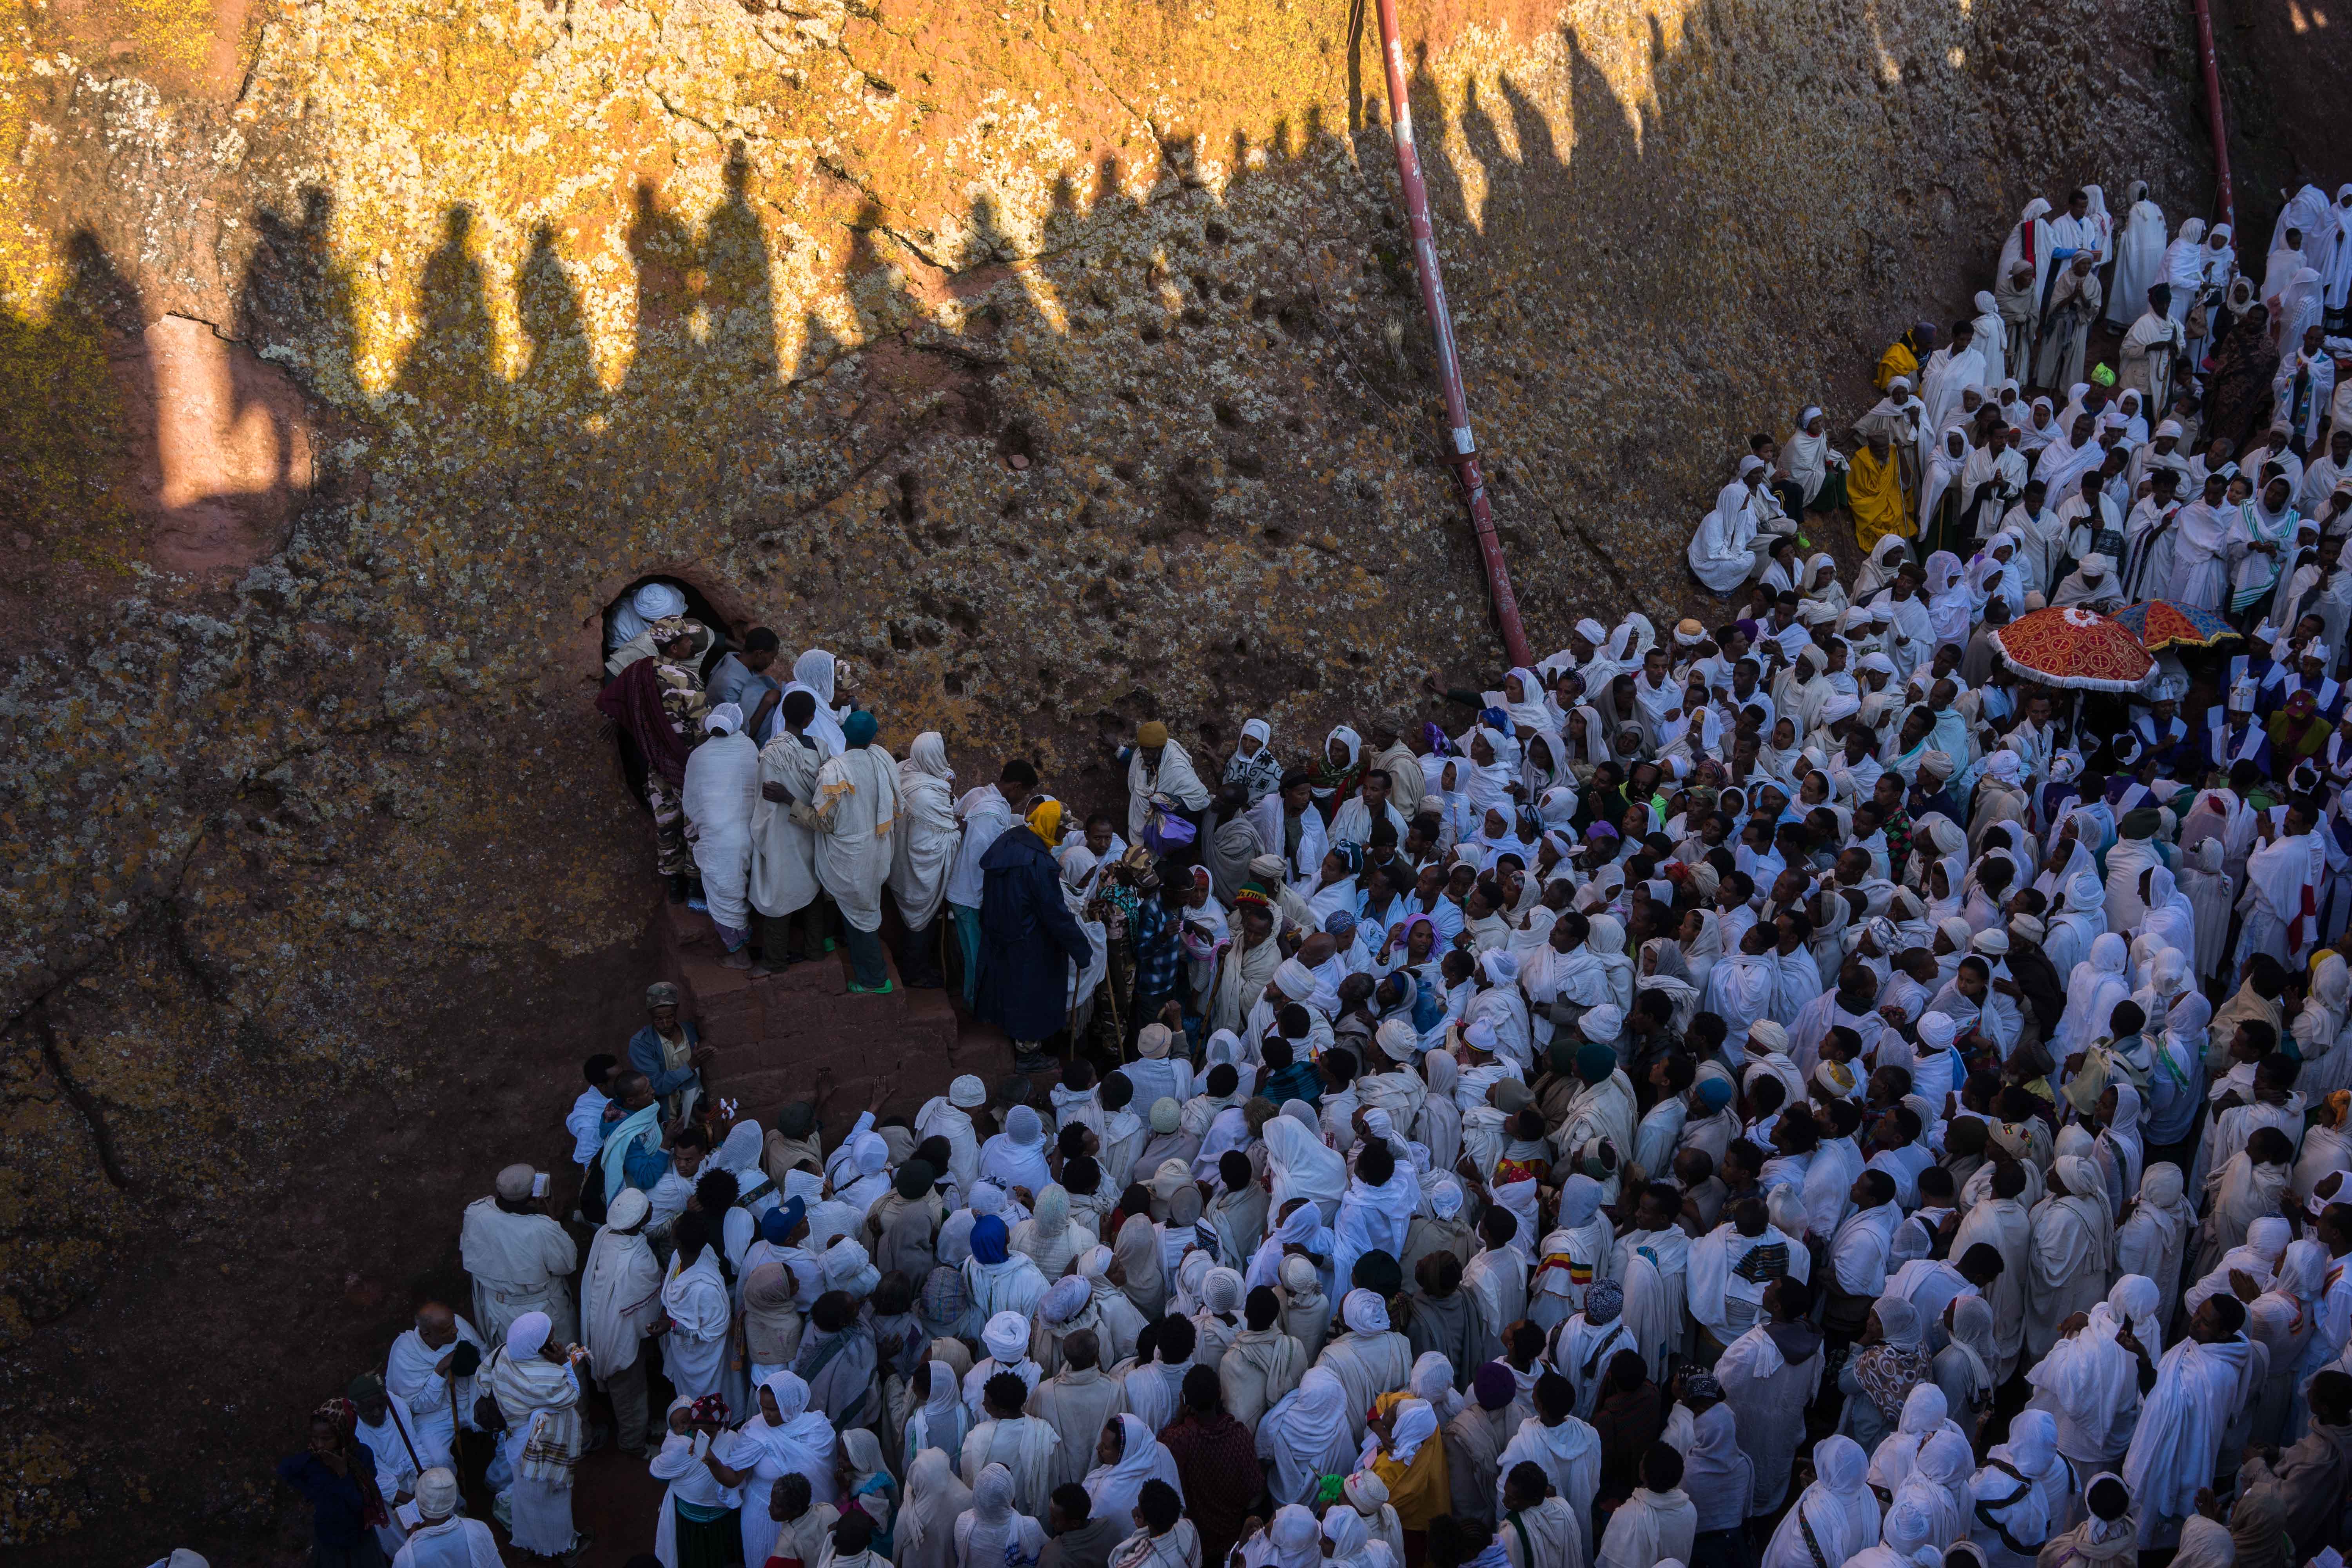 Every year thousands of people gather on Christmas day to pay homage in Lalibela, Ethiopia's most holy city.  Here, pilgrims prepare to enter one of Lalibela's many rock-hewn churches built in the 12th century as a 'New Jerusalem' after Muslim conquest hindered Christian passage to the holy land. 